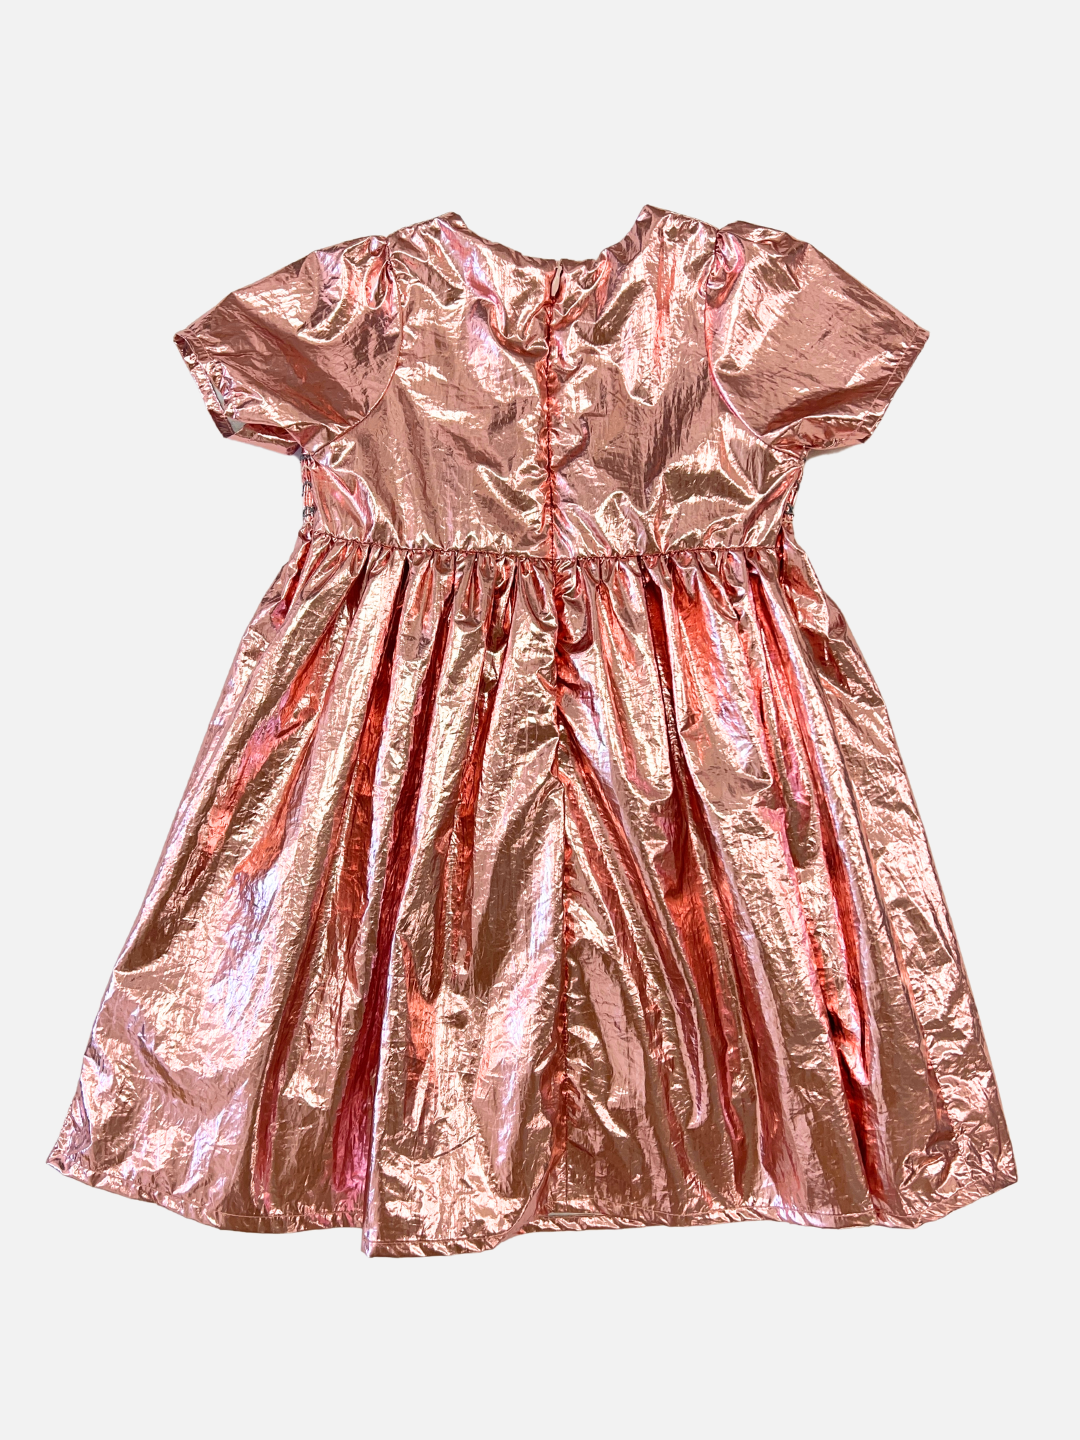 Back view of kids party dress in pink metallic fabric with a round neck, short sleeves, empire waist and full skirt.